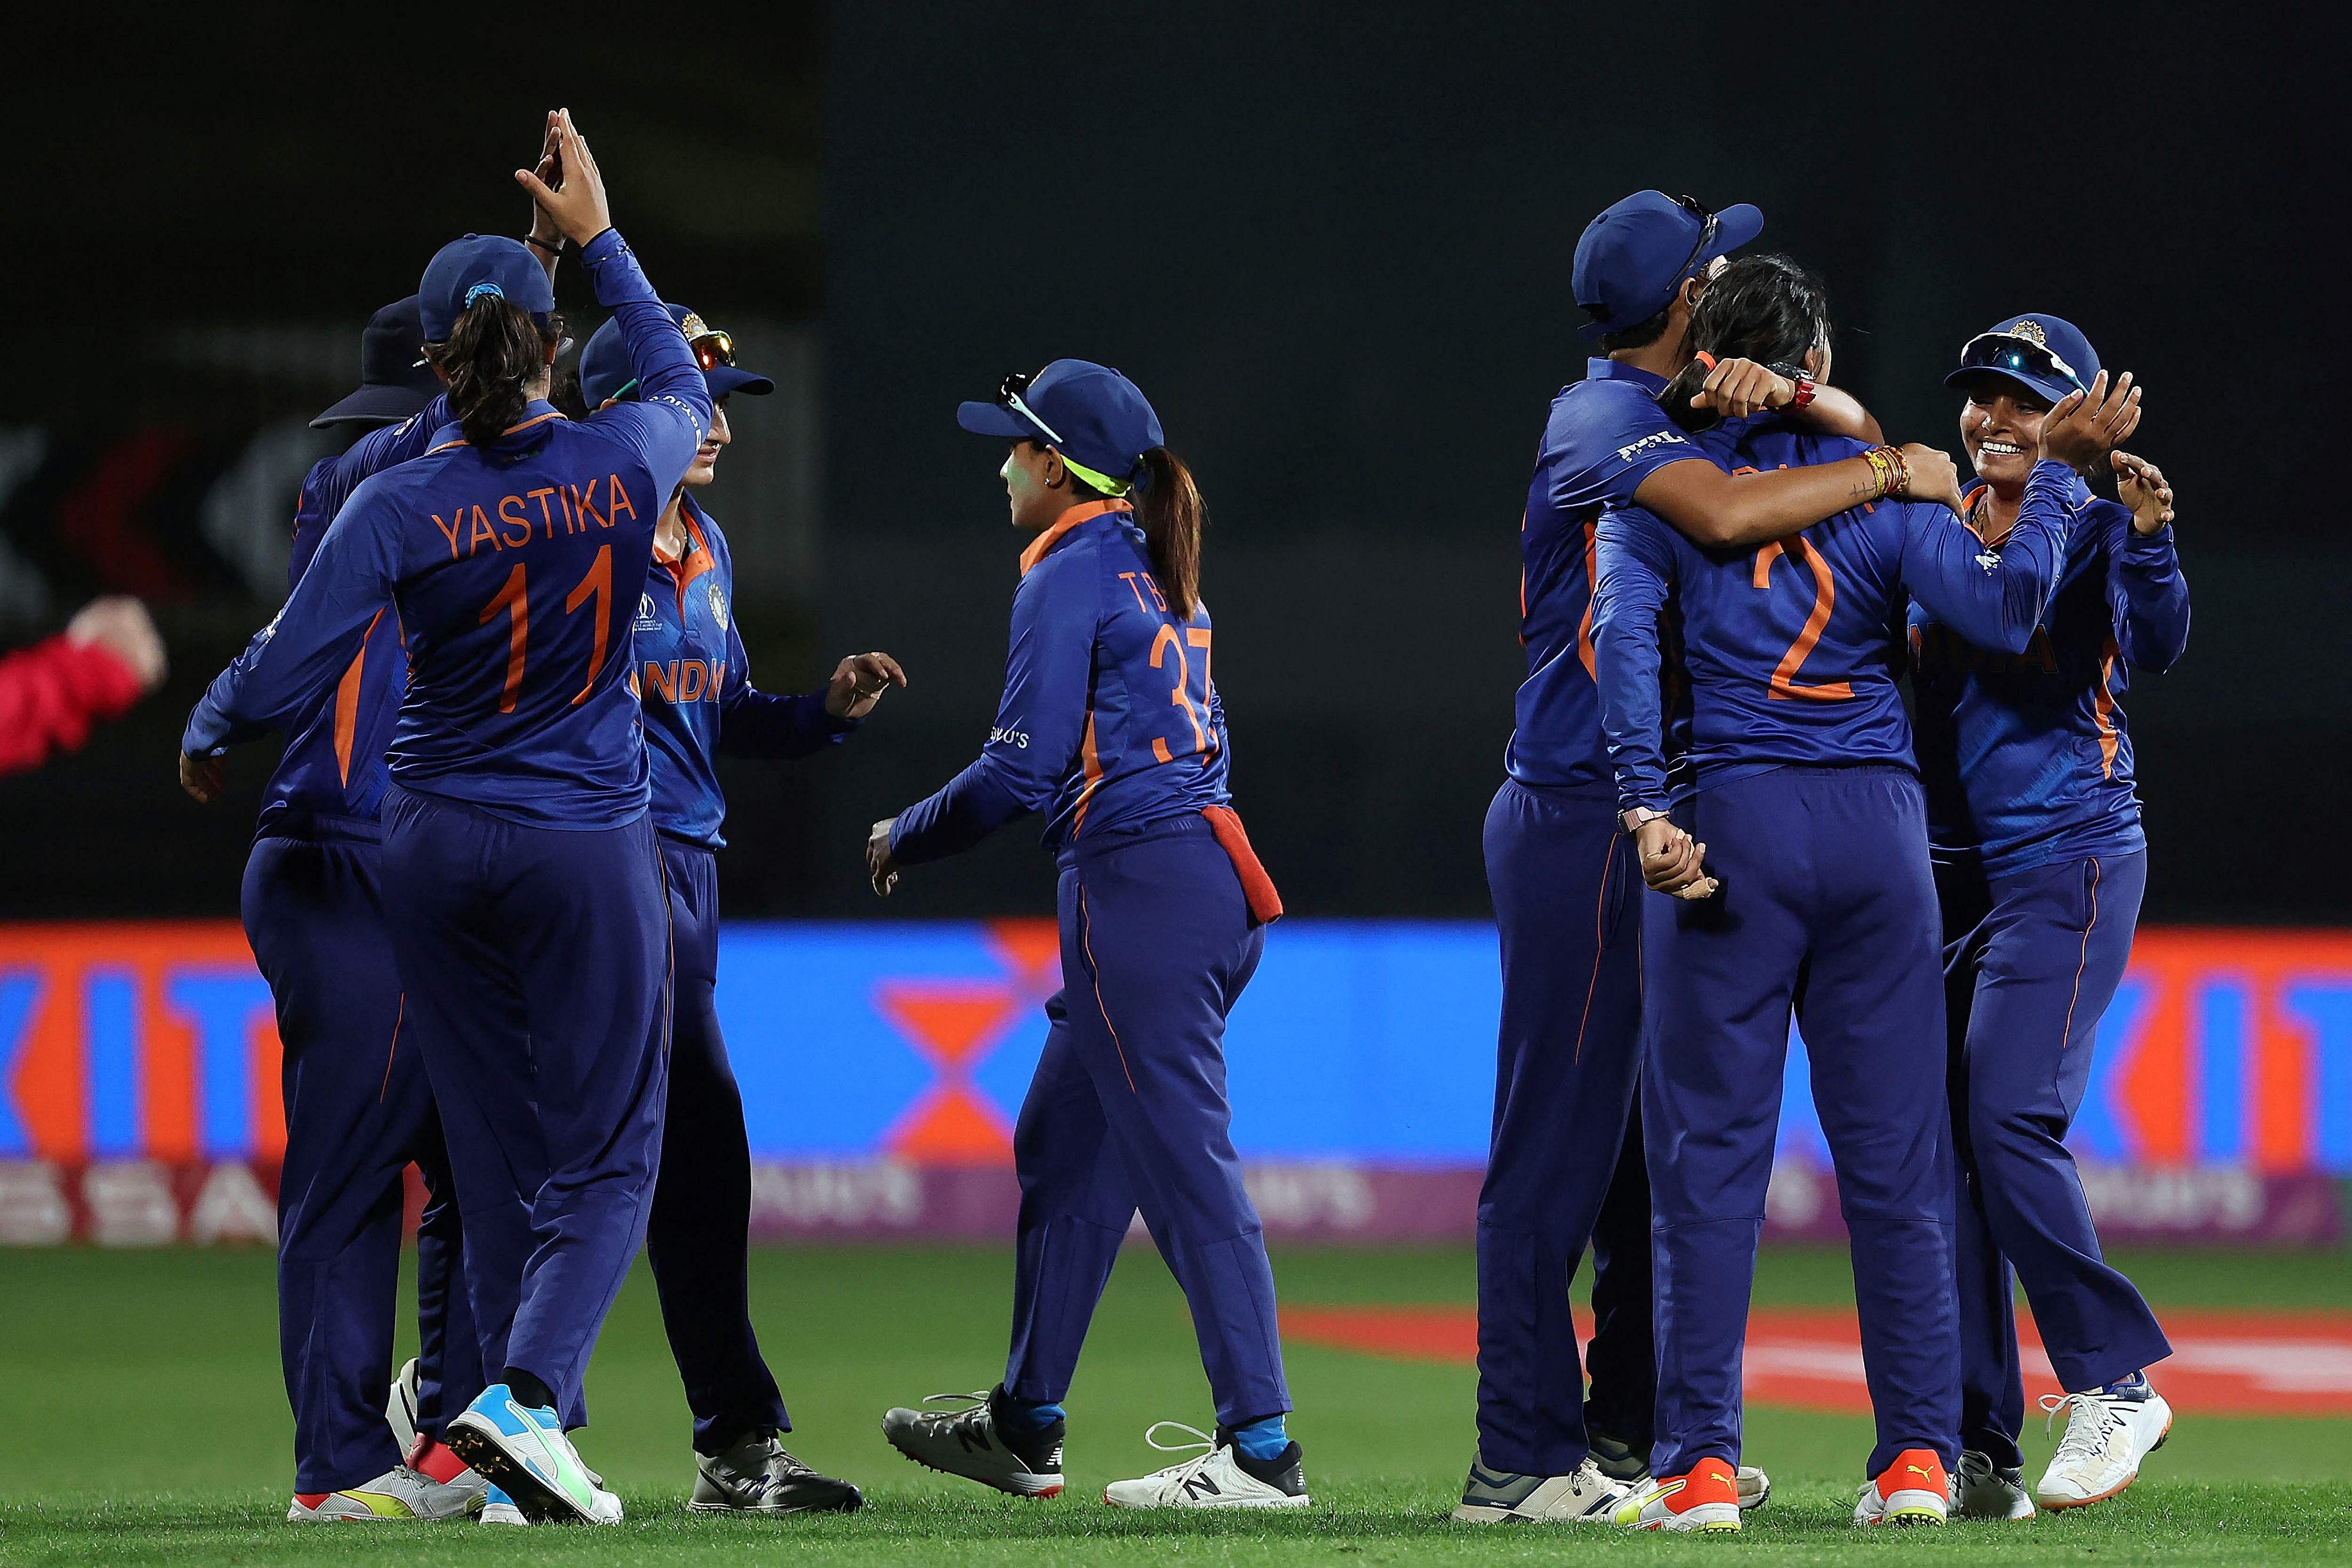 Indian players celebrate after winning the 2022 Women's Cricket World Cup match between West Indies and India at Seddon Park in Hamilton. Credit: AFP Photo